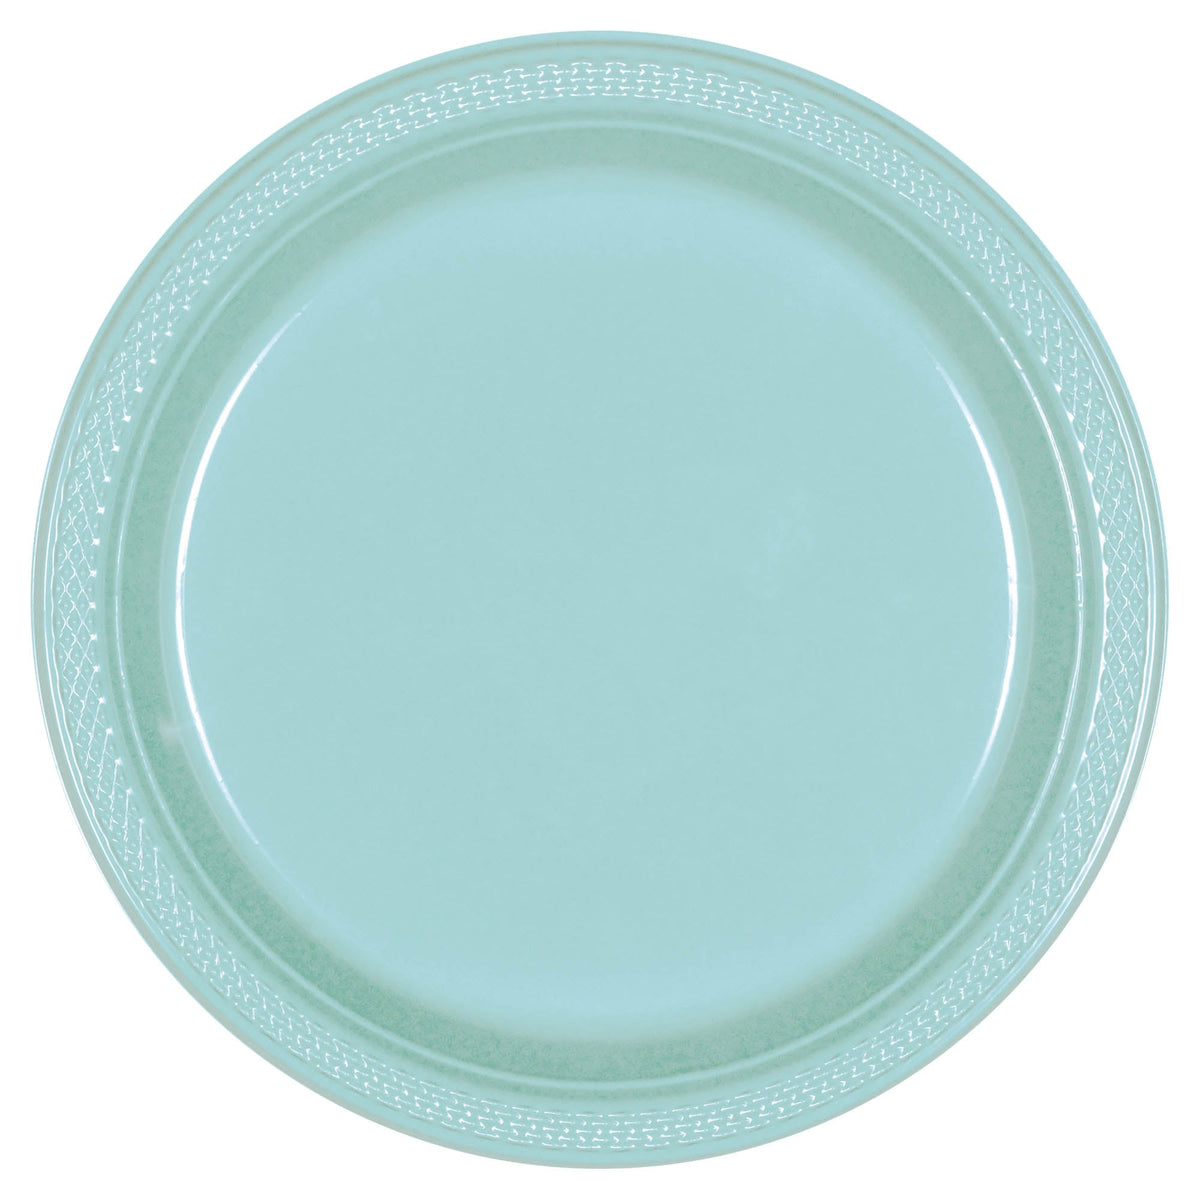 Robin's Egg Blue 10" Round Plastic Plates, 20 count